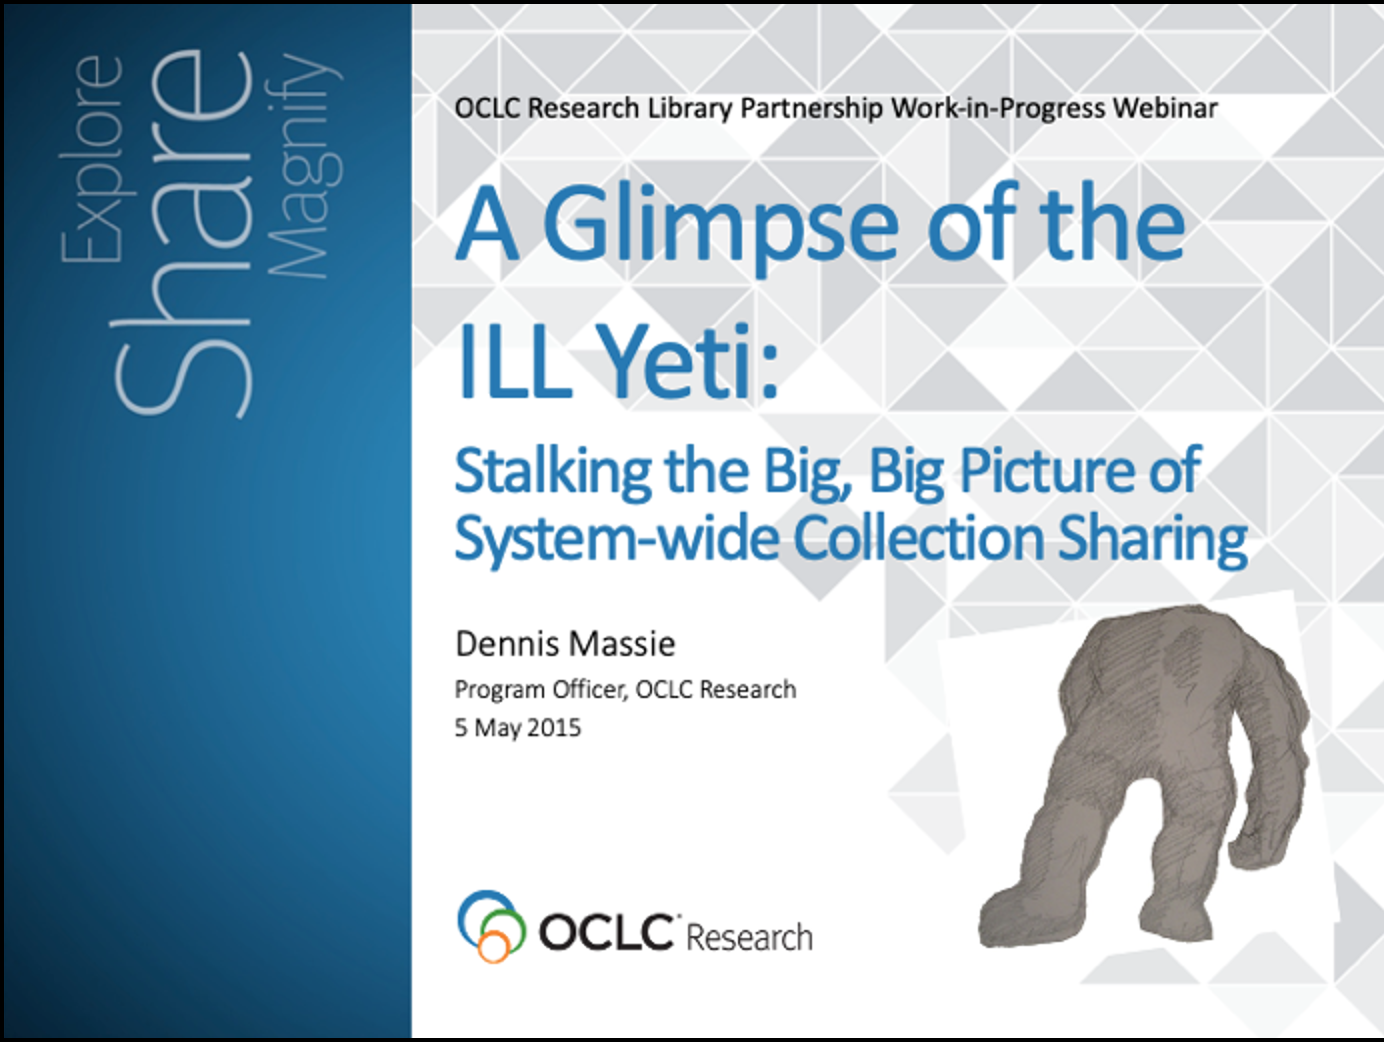 A Glimpse of the ILL Yeti: Stalking the Big, Big Picture of System-wide Collection Sharing